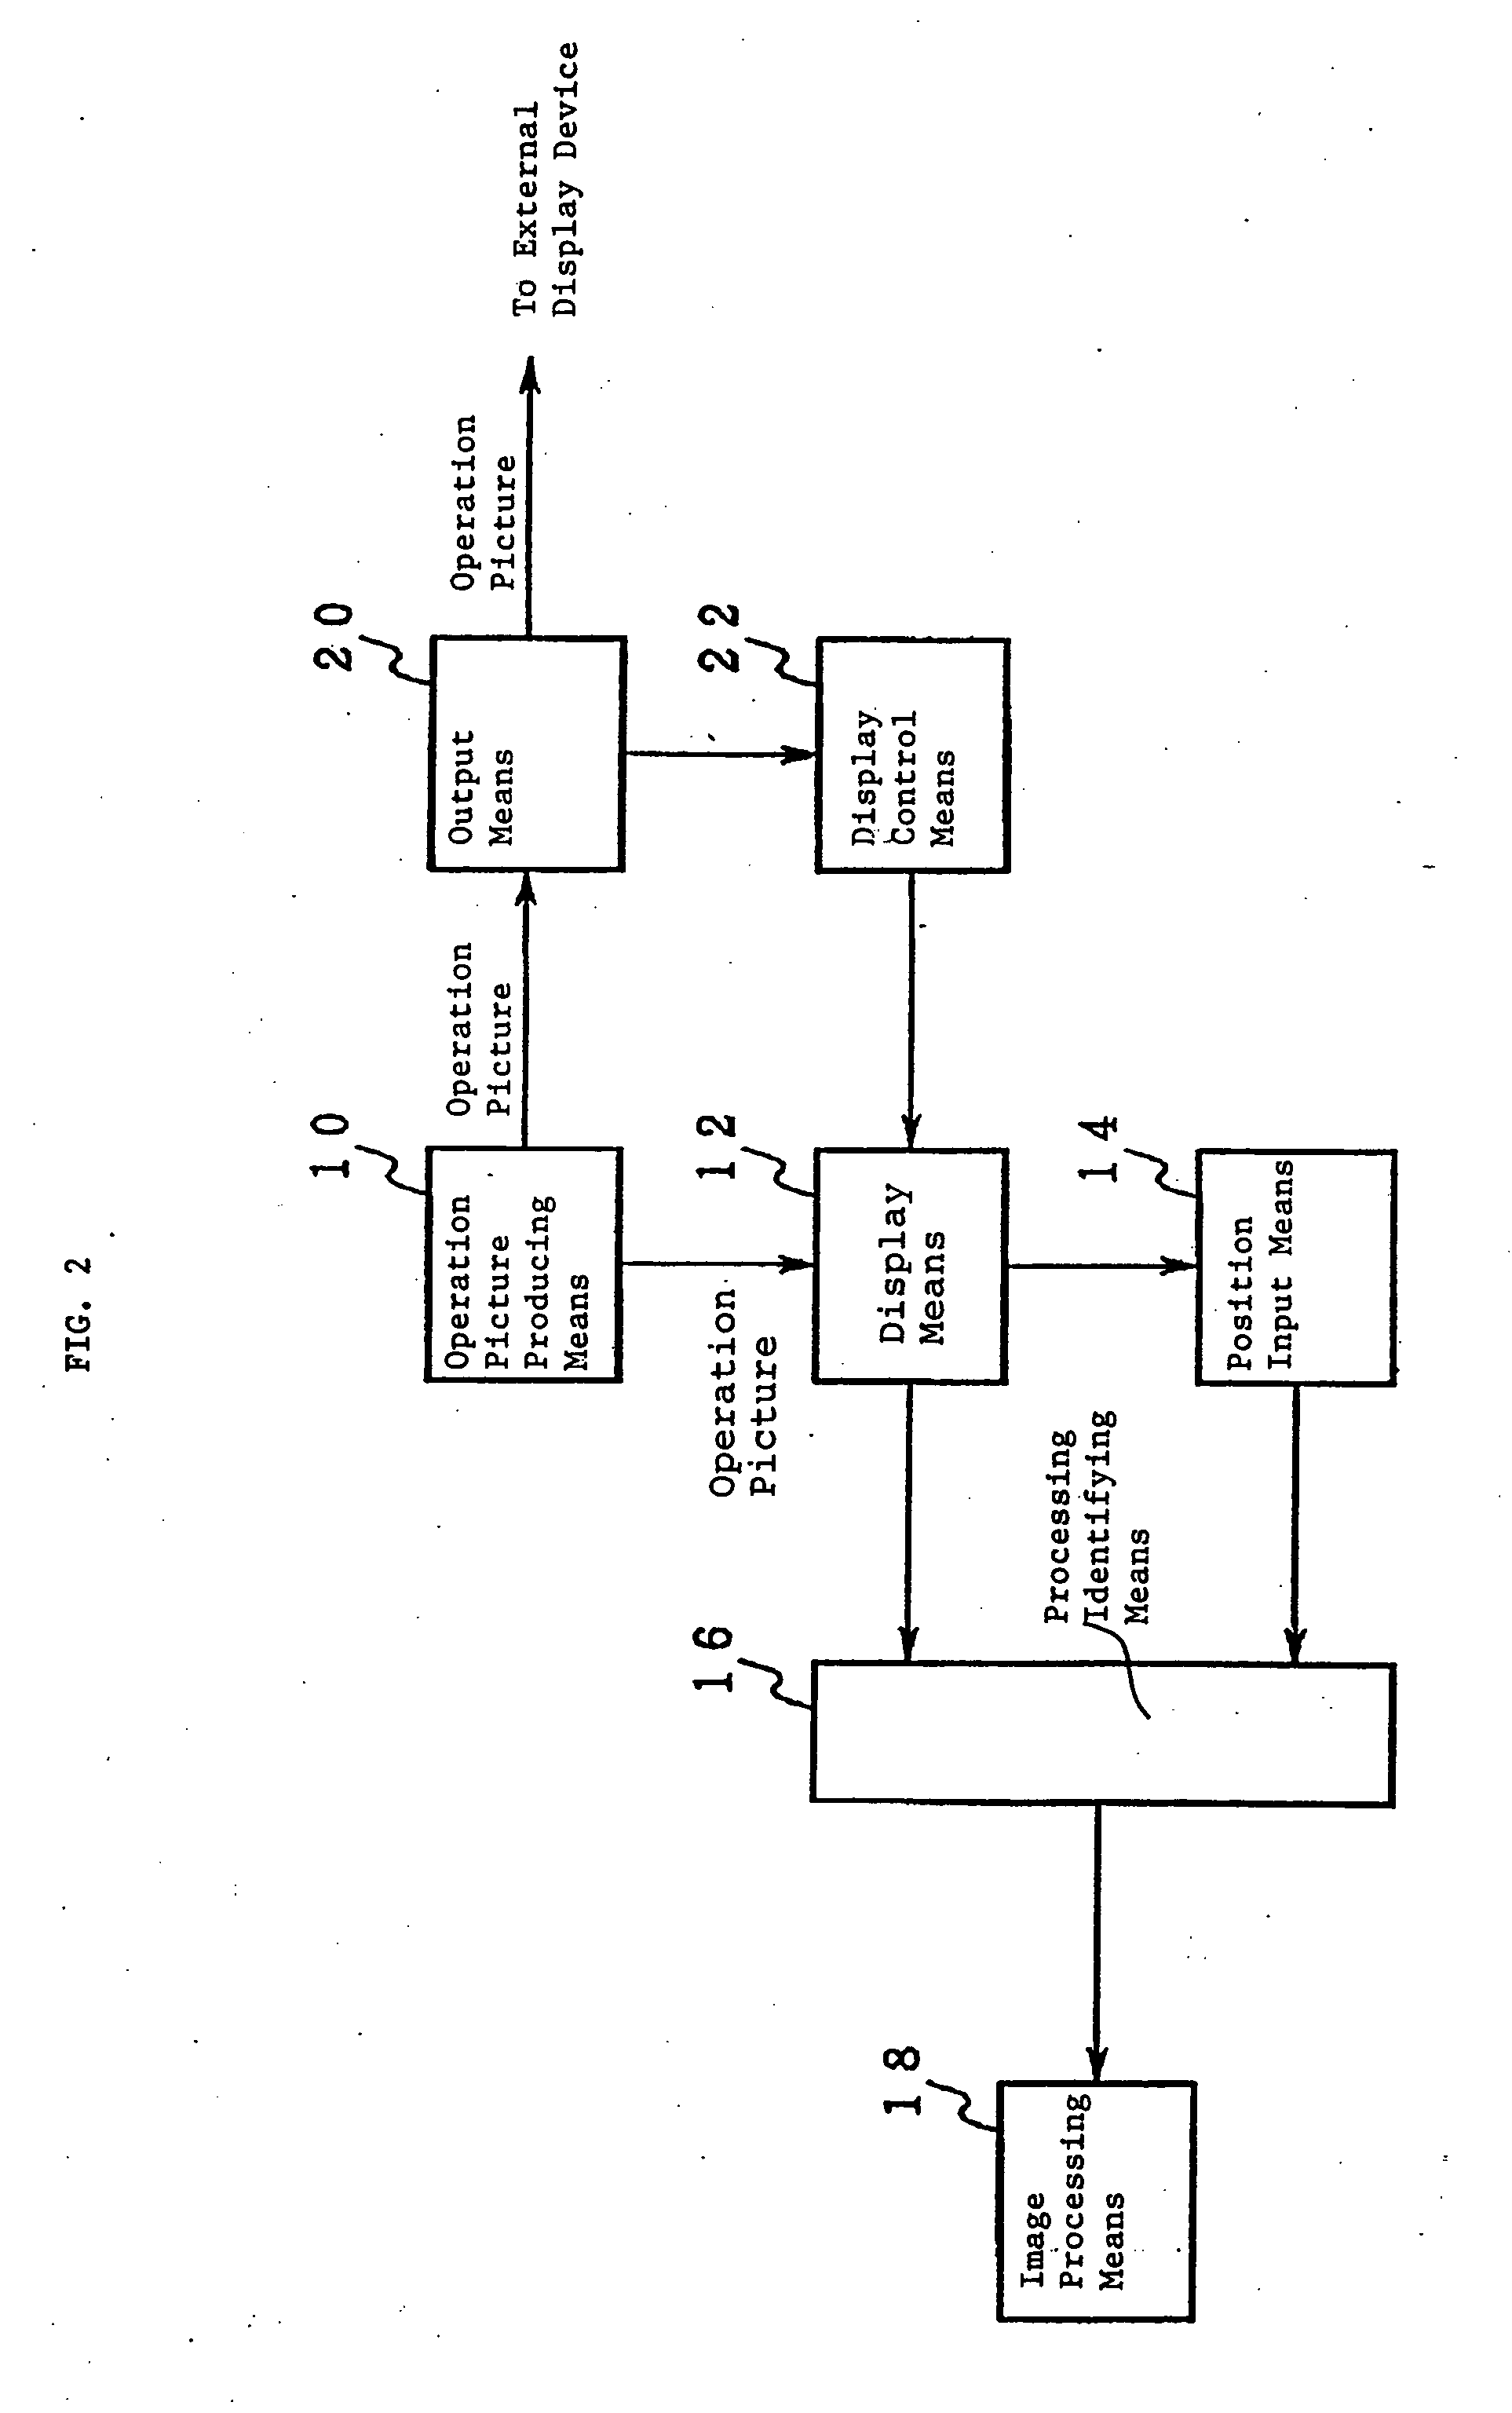 Image processing apparatus and method